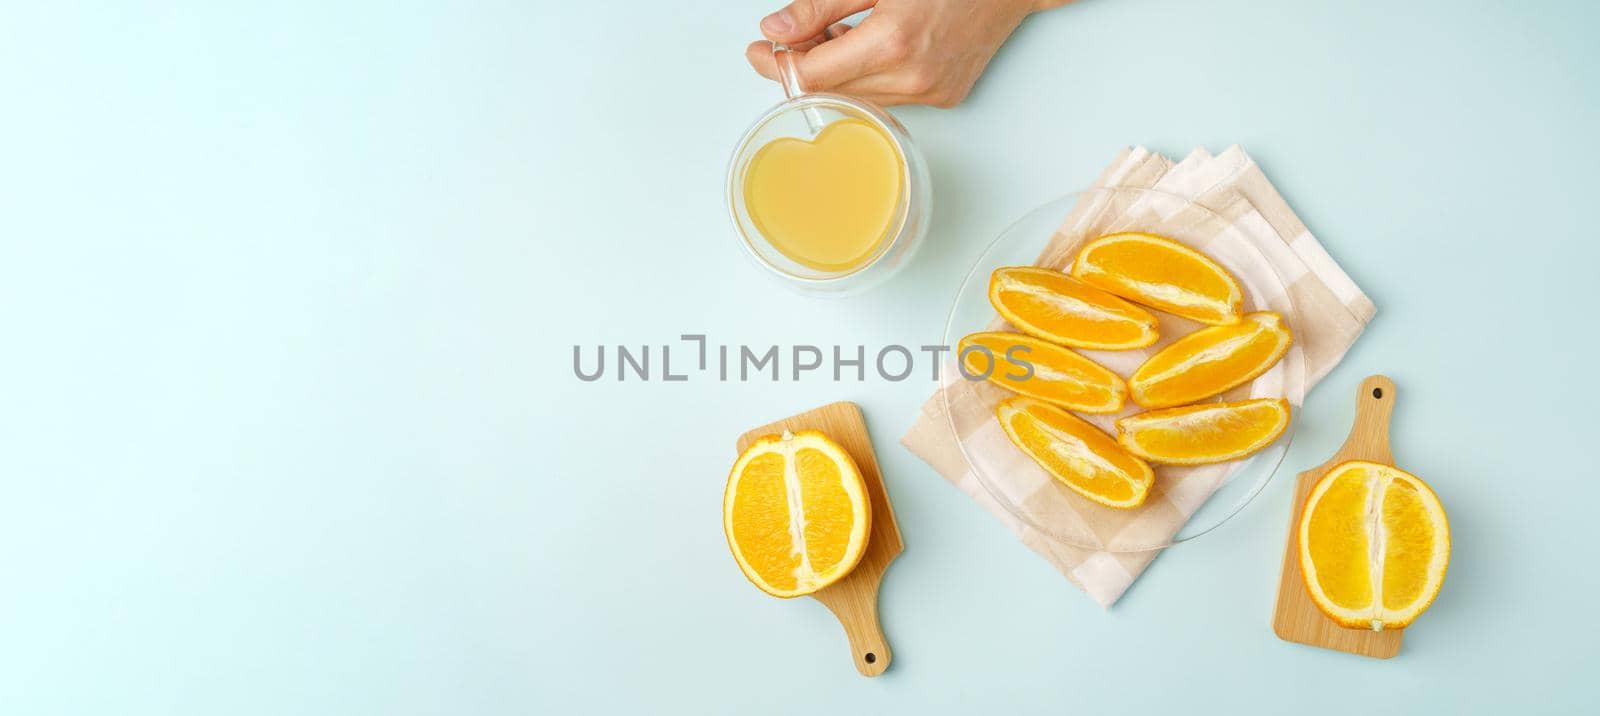 Orange juice in the glass. Healthy drink on a blue background. View from above. Love for fruits, healthy food. Copy space